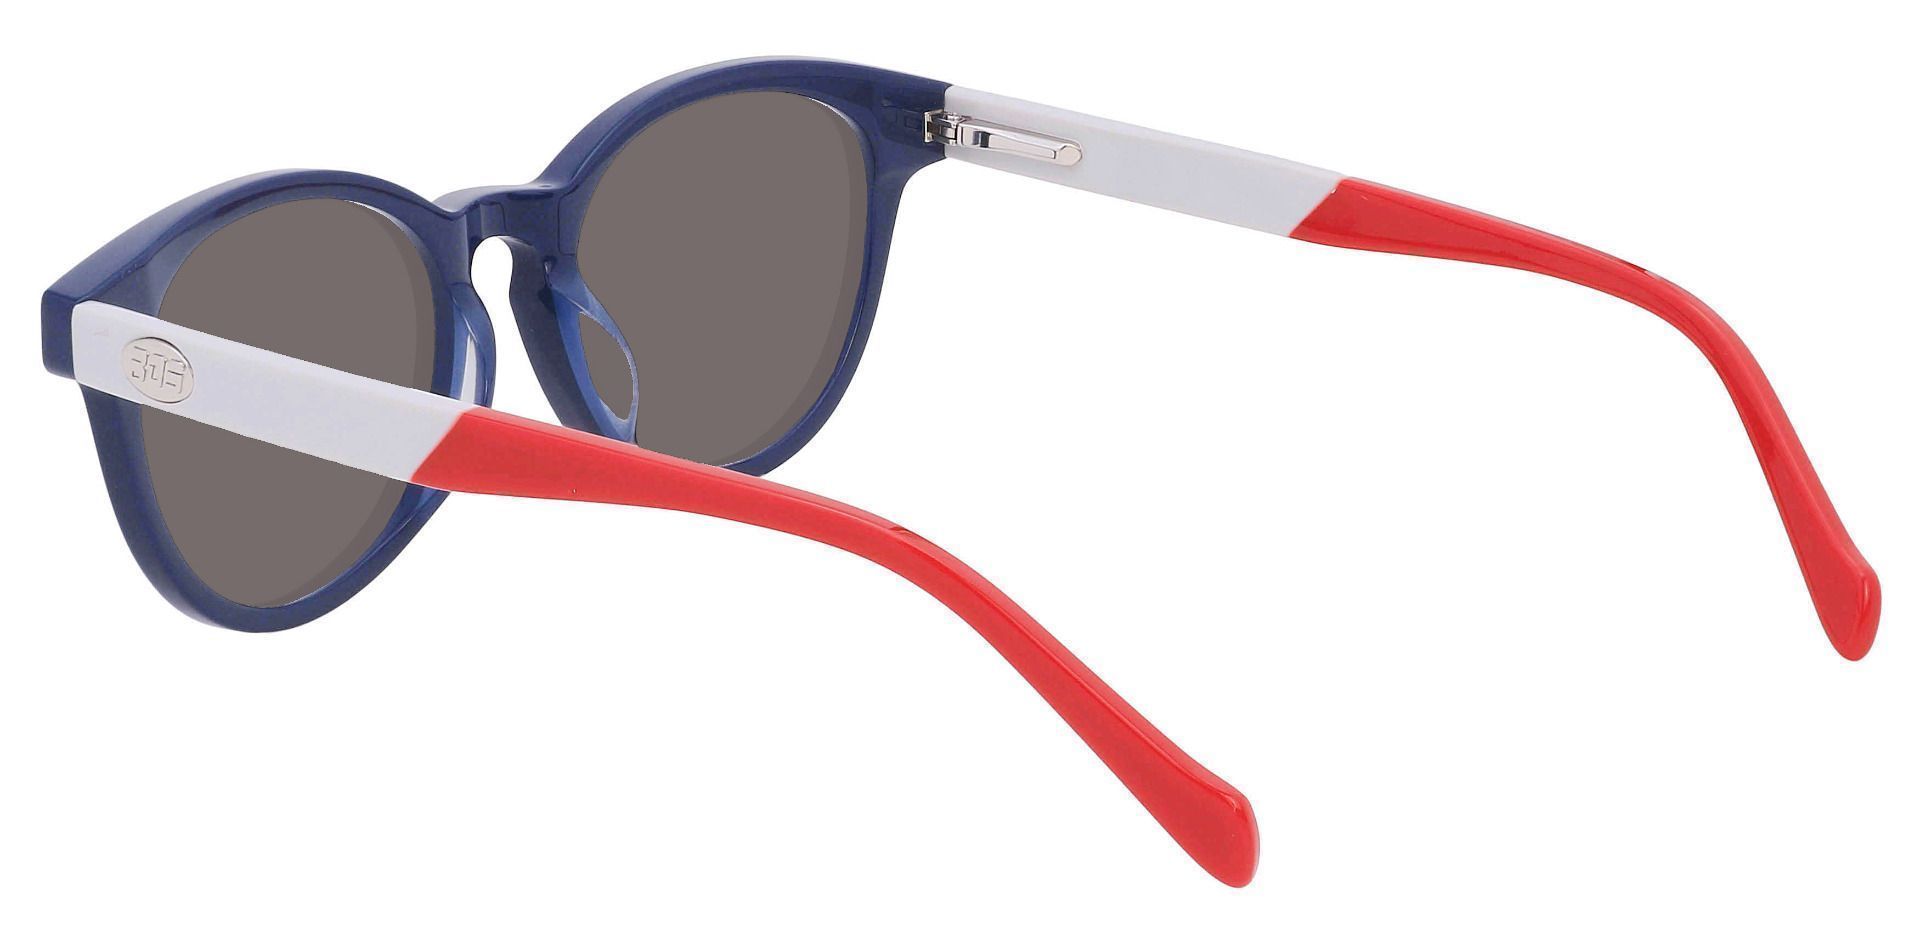 Revere Oval Non-Rx Sunglasses - Blue Frame With Gray Lenses